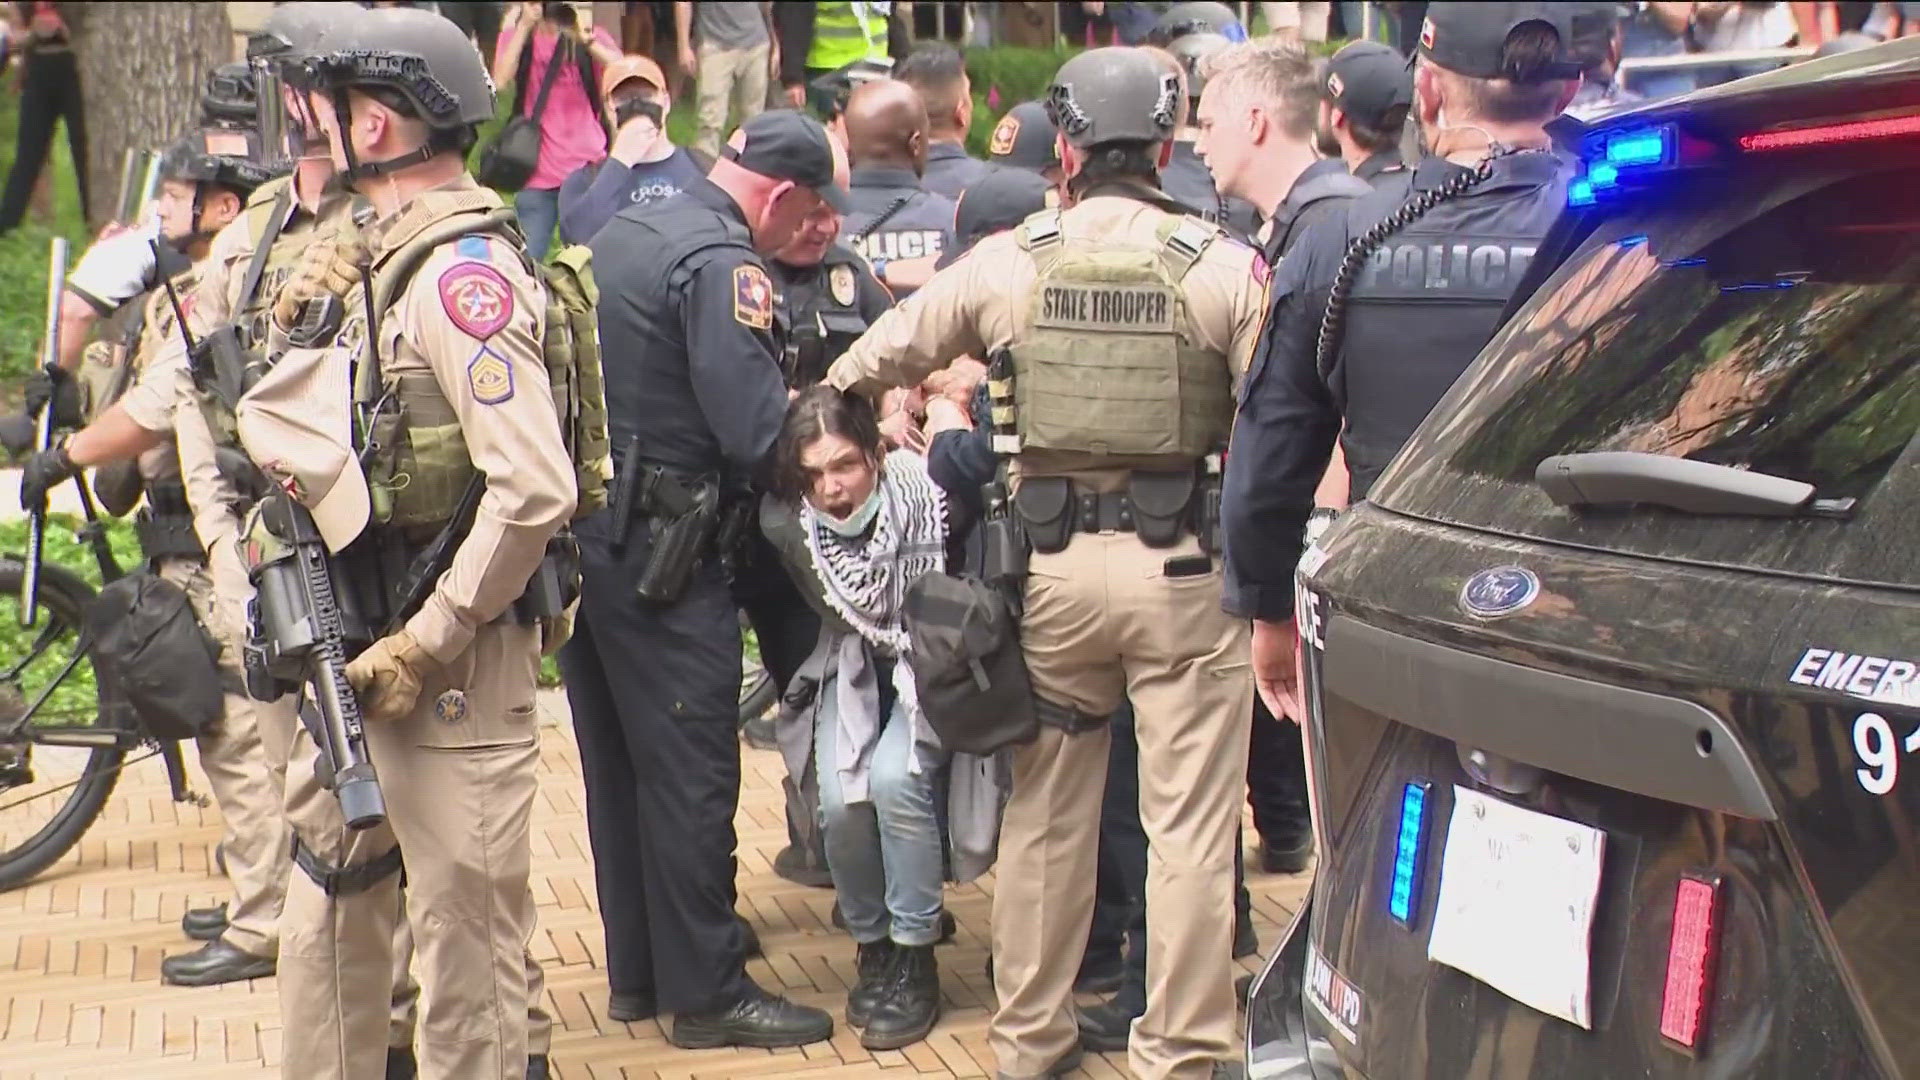 A large pro-Palestine protest on the UT campus that resulted in multiple arrests has moved to the Travis County Jail. At least 50 people were arrested.